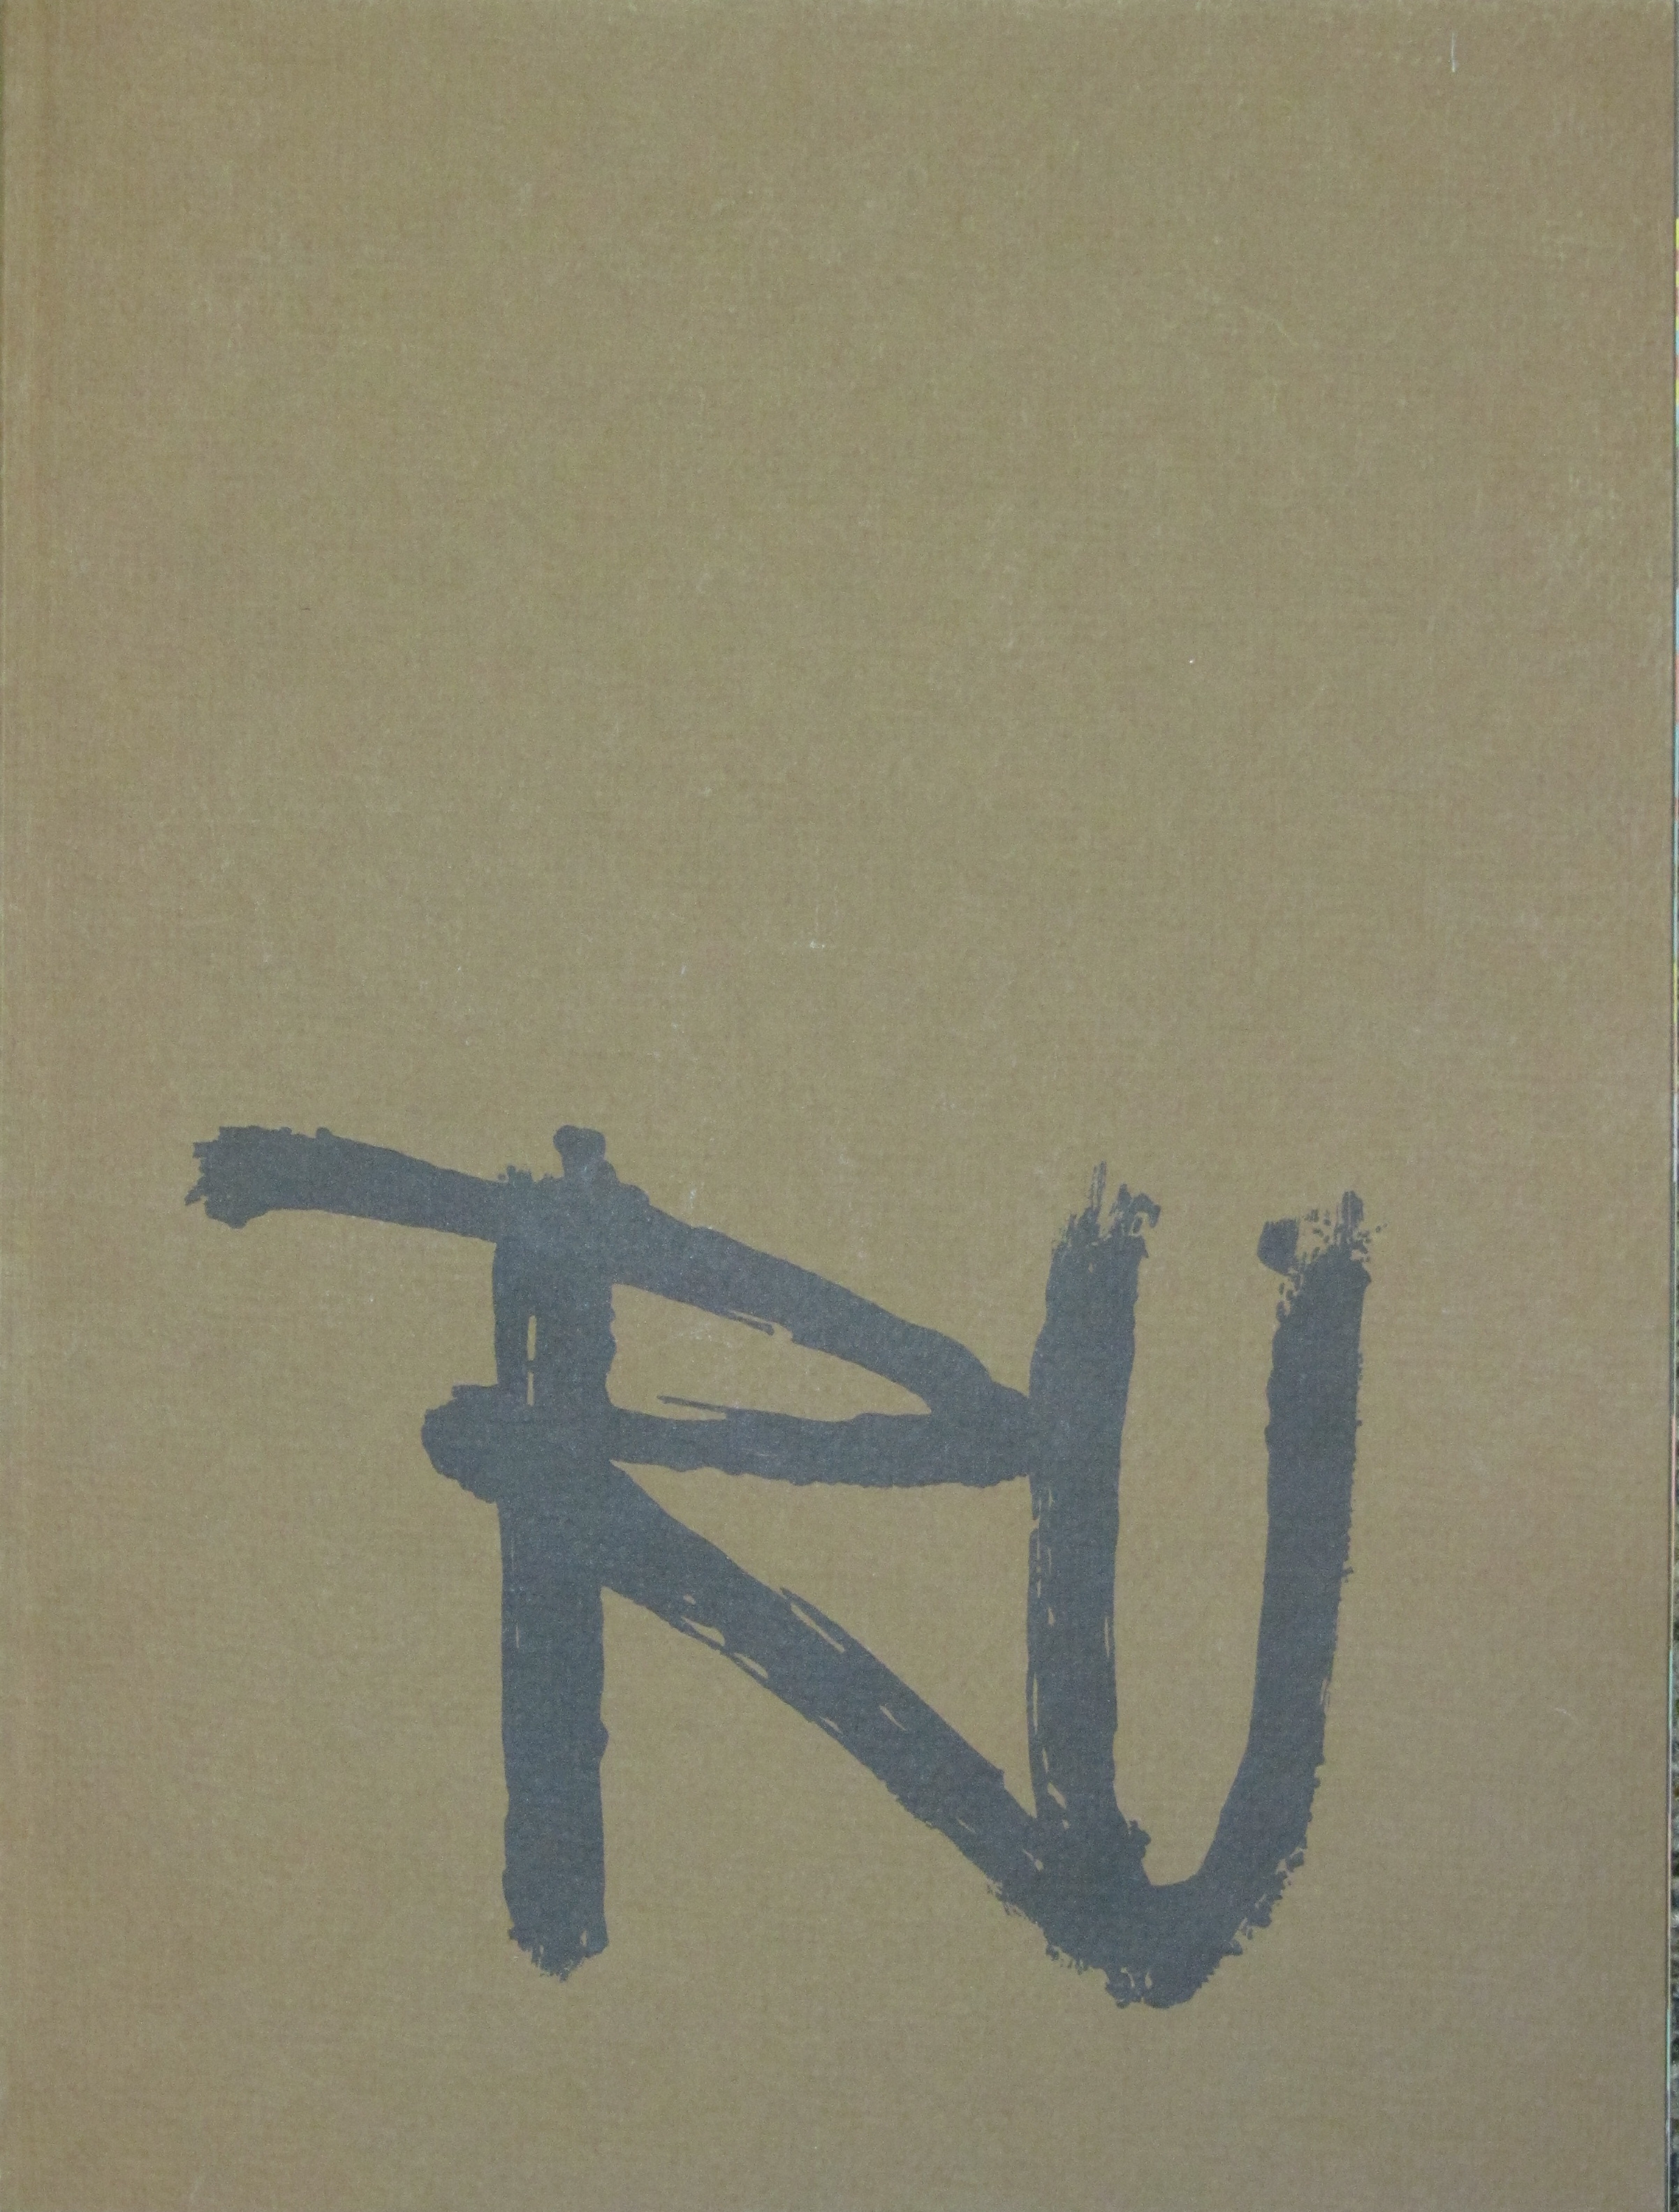 1972 - Scarlet Letter Year Book 2 Cover